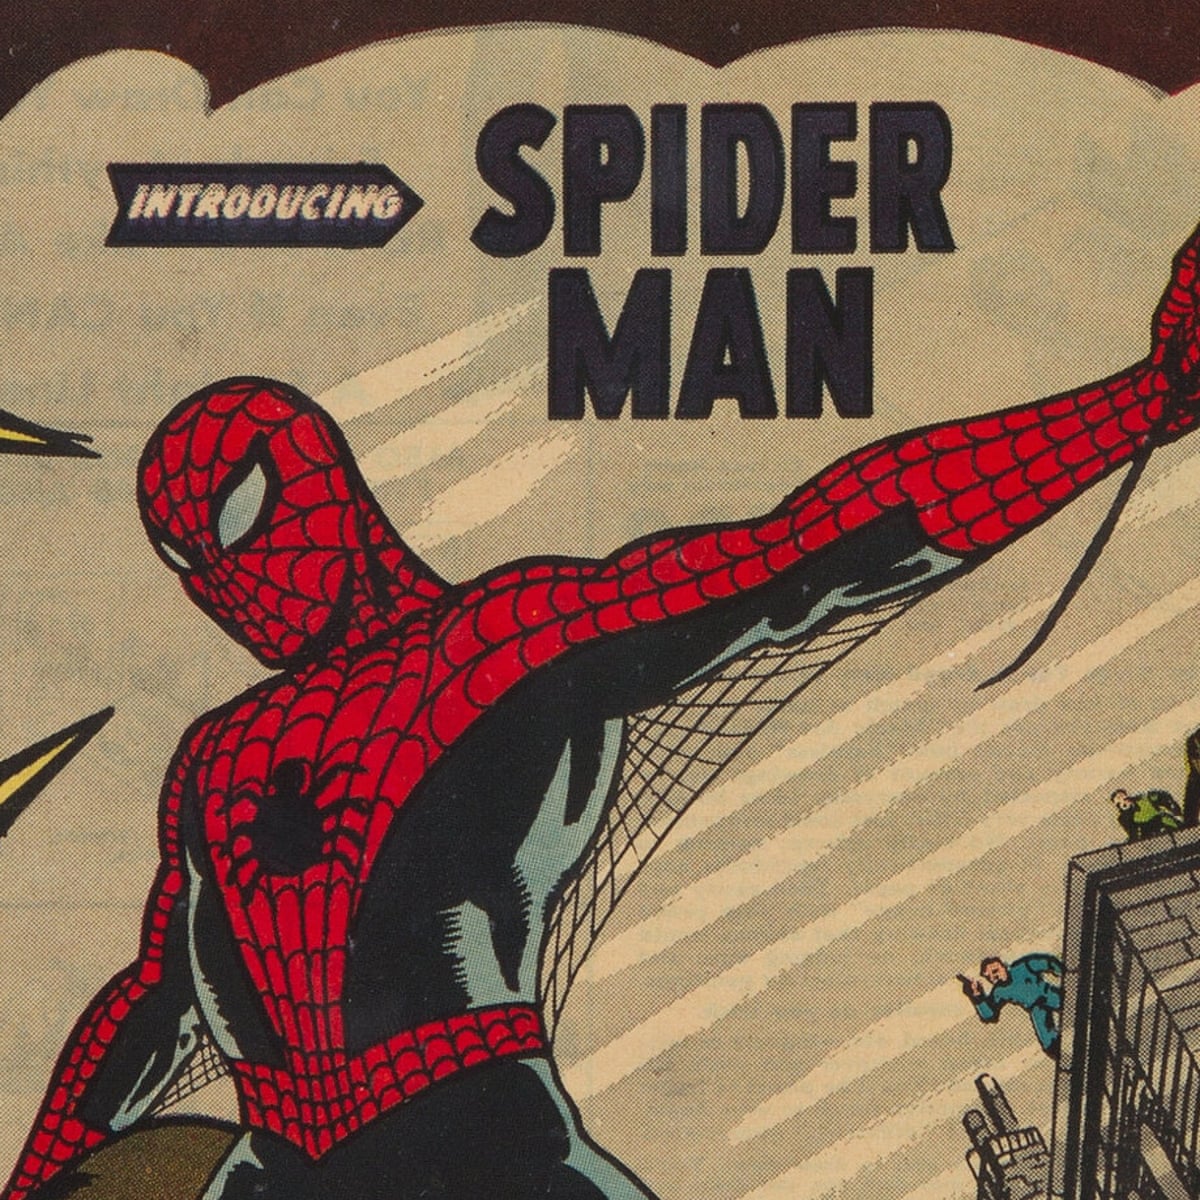 Spider-Man beats Superman in record $ comic sale | Comics and graphic  novels | The Guardian